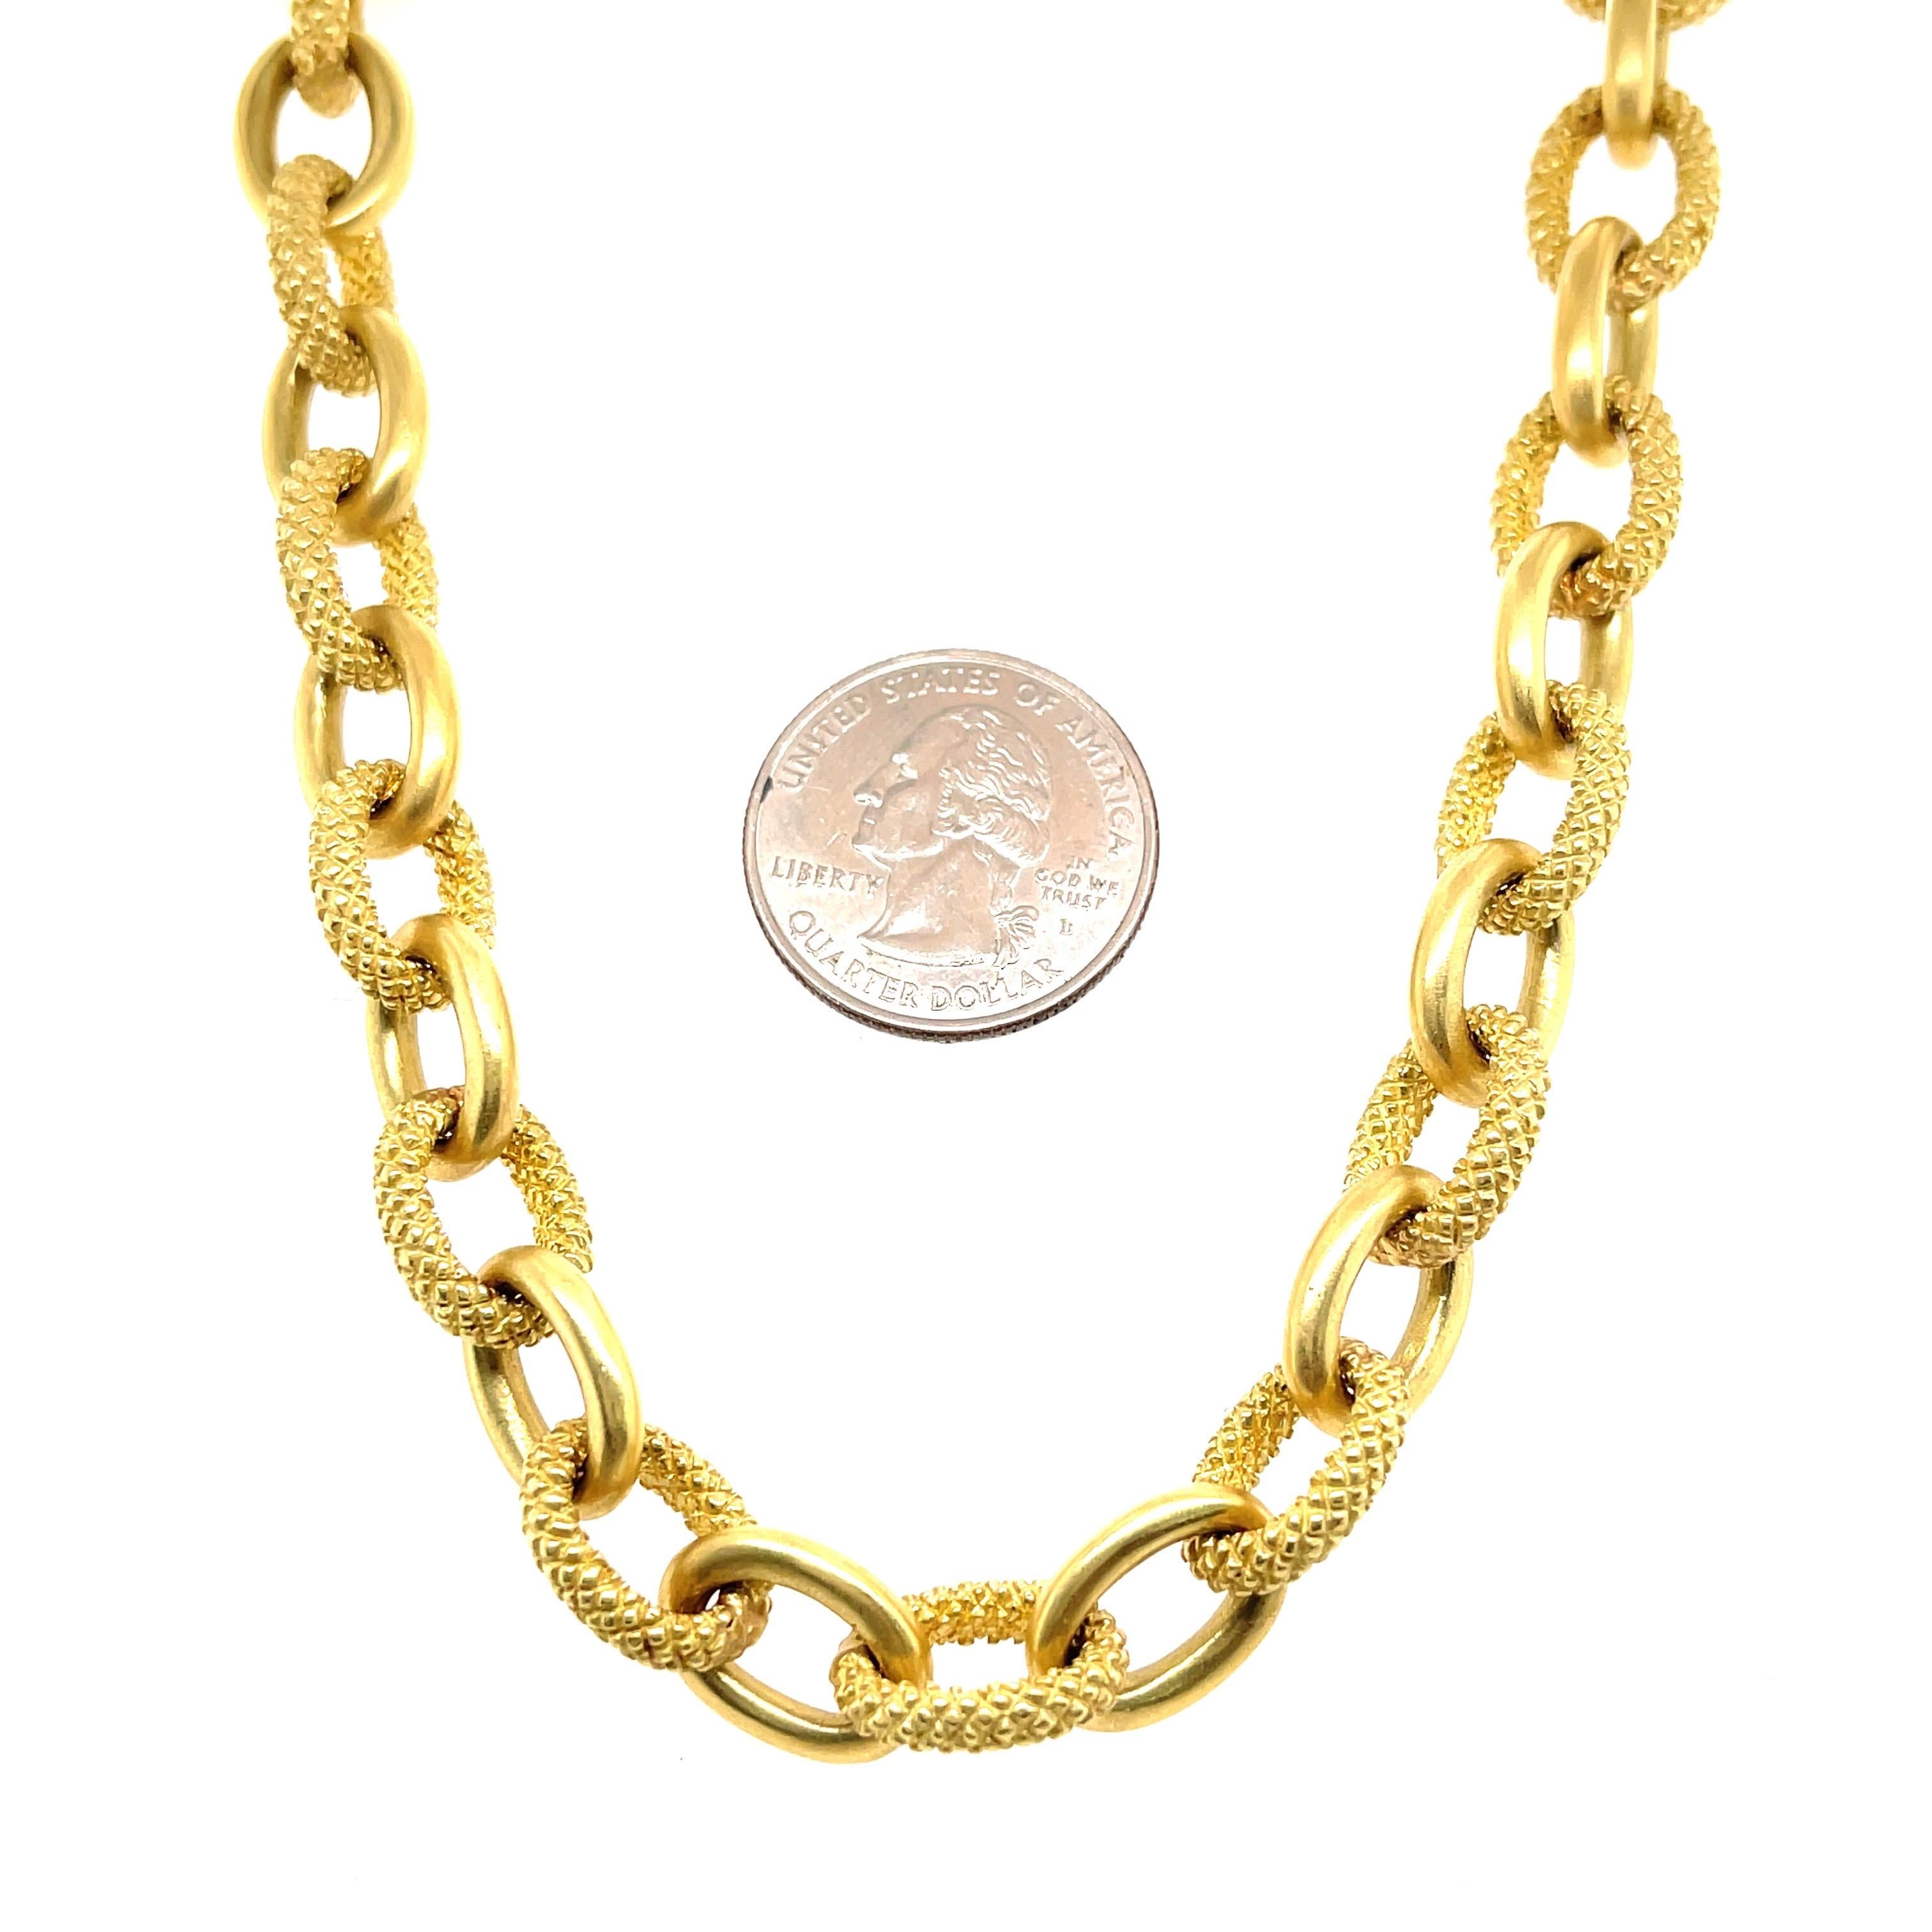 Judith Ripka 18 karat yellow gold necklace featuring polished and beaded links weighing 135.9 grams.